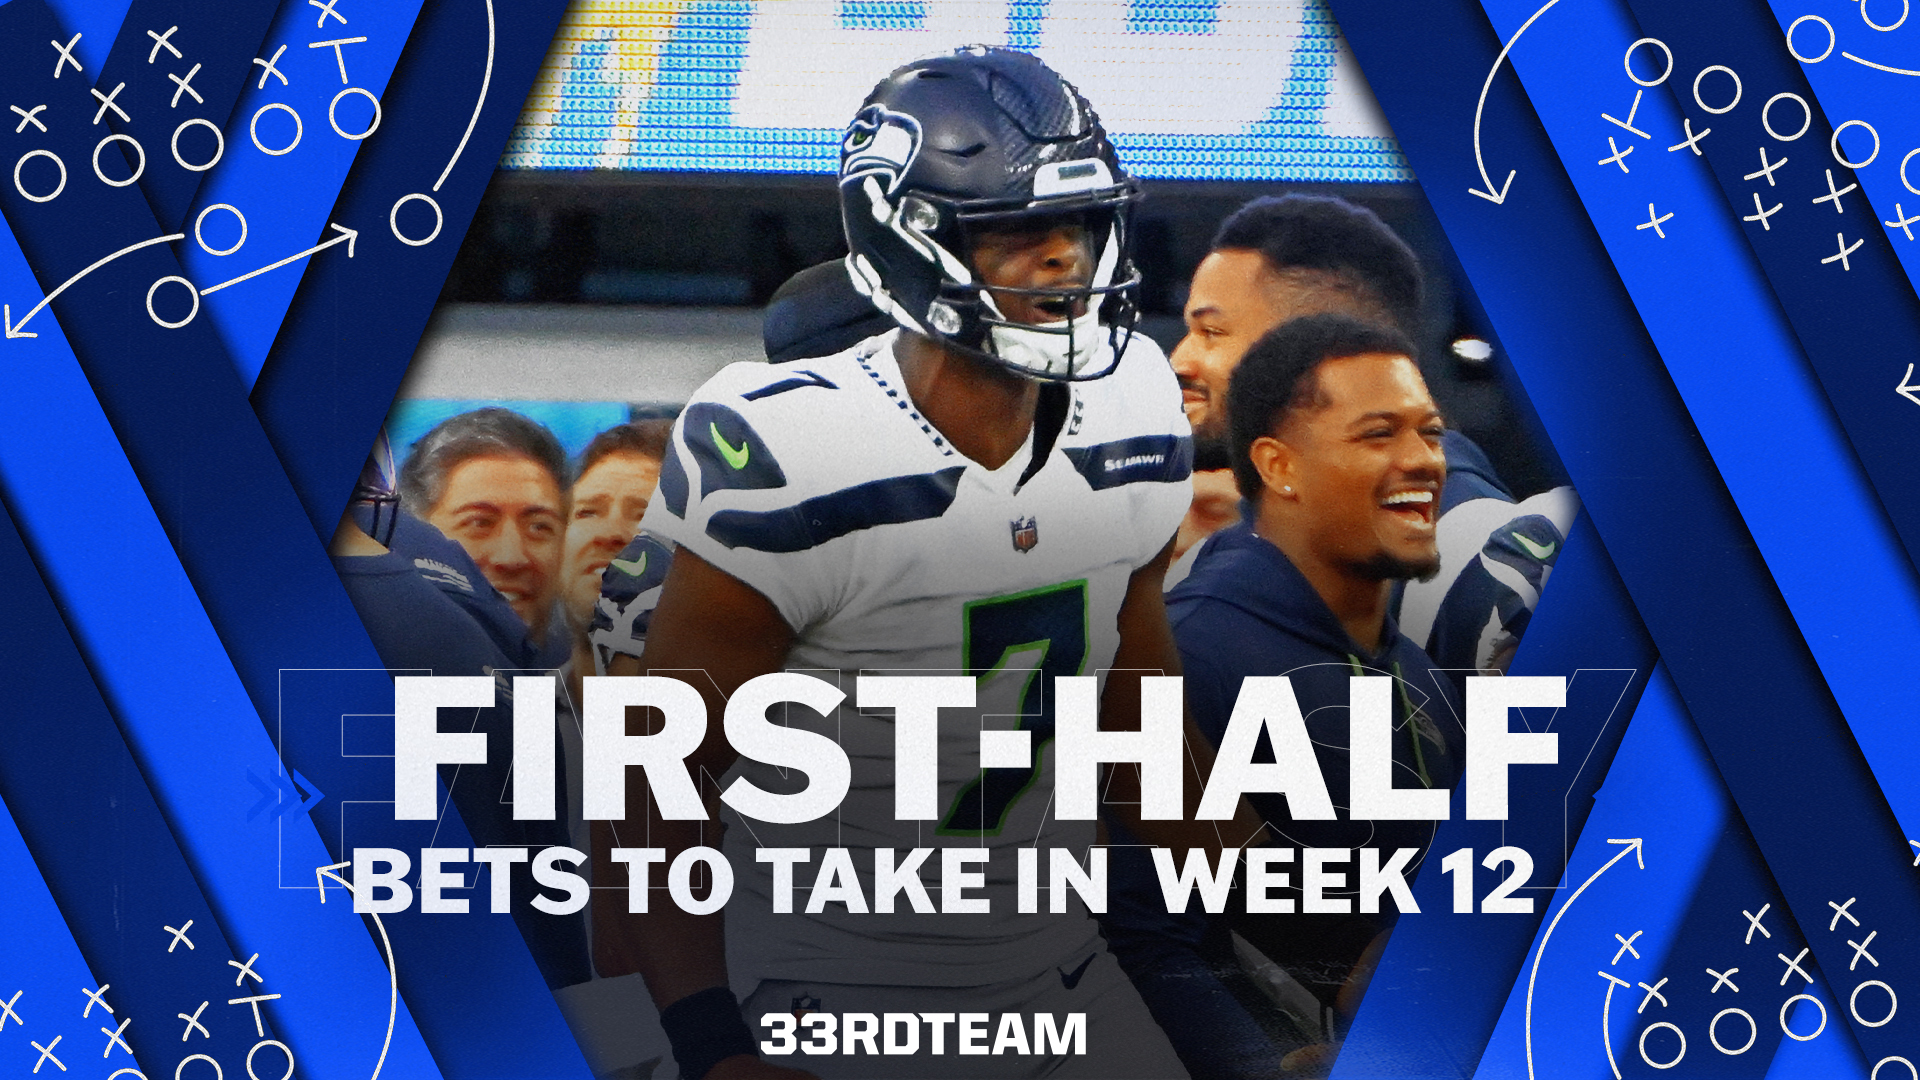 Two First-Half Bets to Take in Week 12